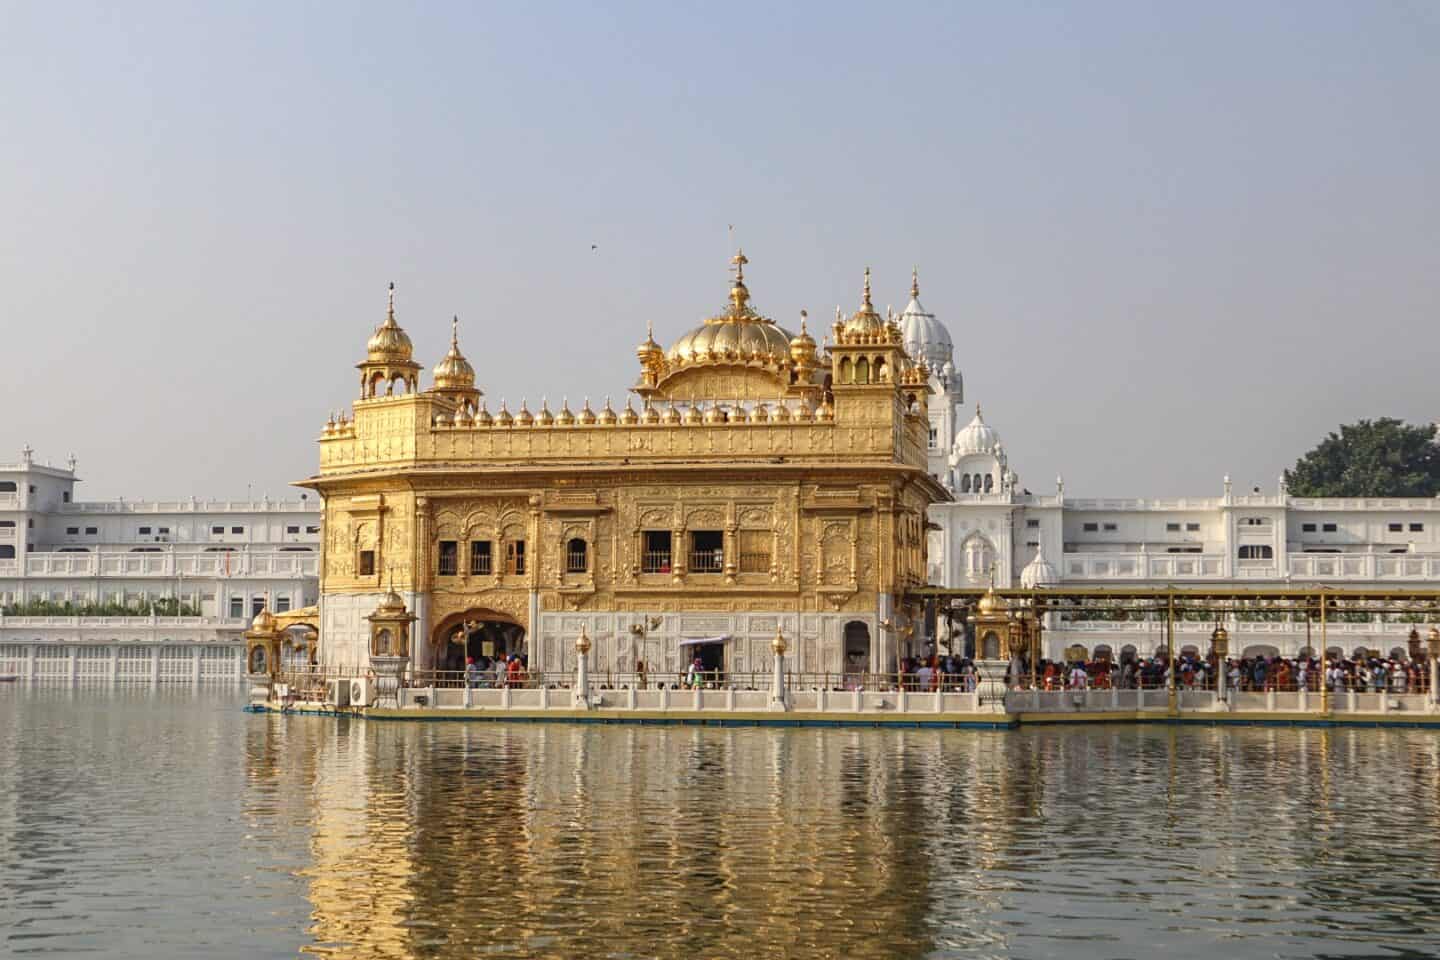 The Golden Temple in Amritsar in the lake